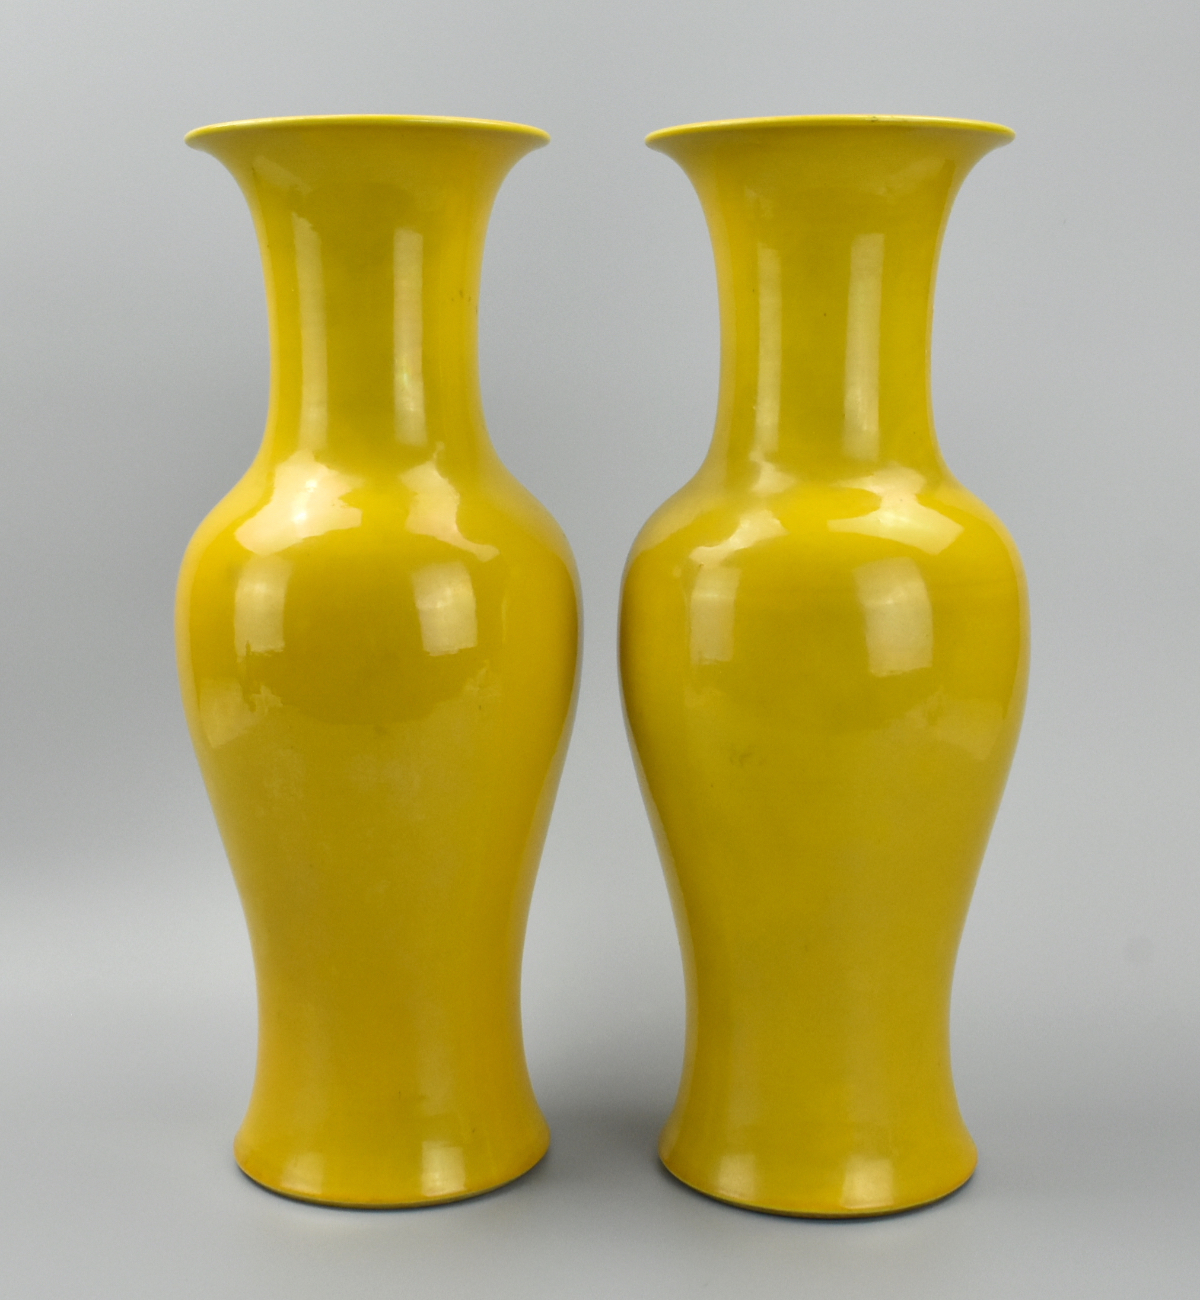 PAIR OF CHINESE YELLOW GLAZED VASES 19T 20H 2cf60f